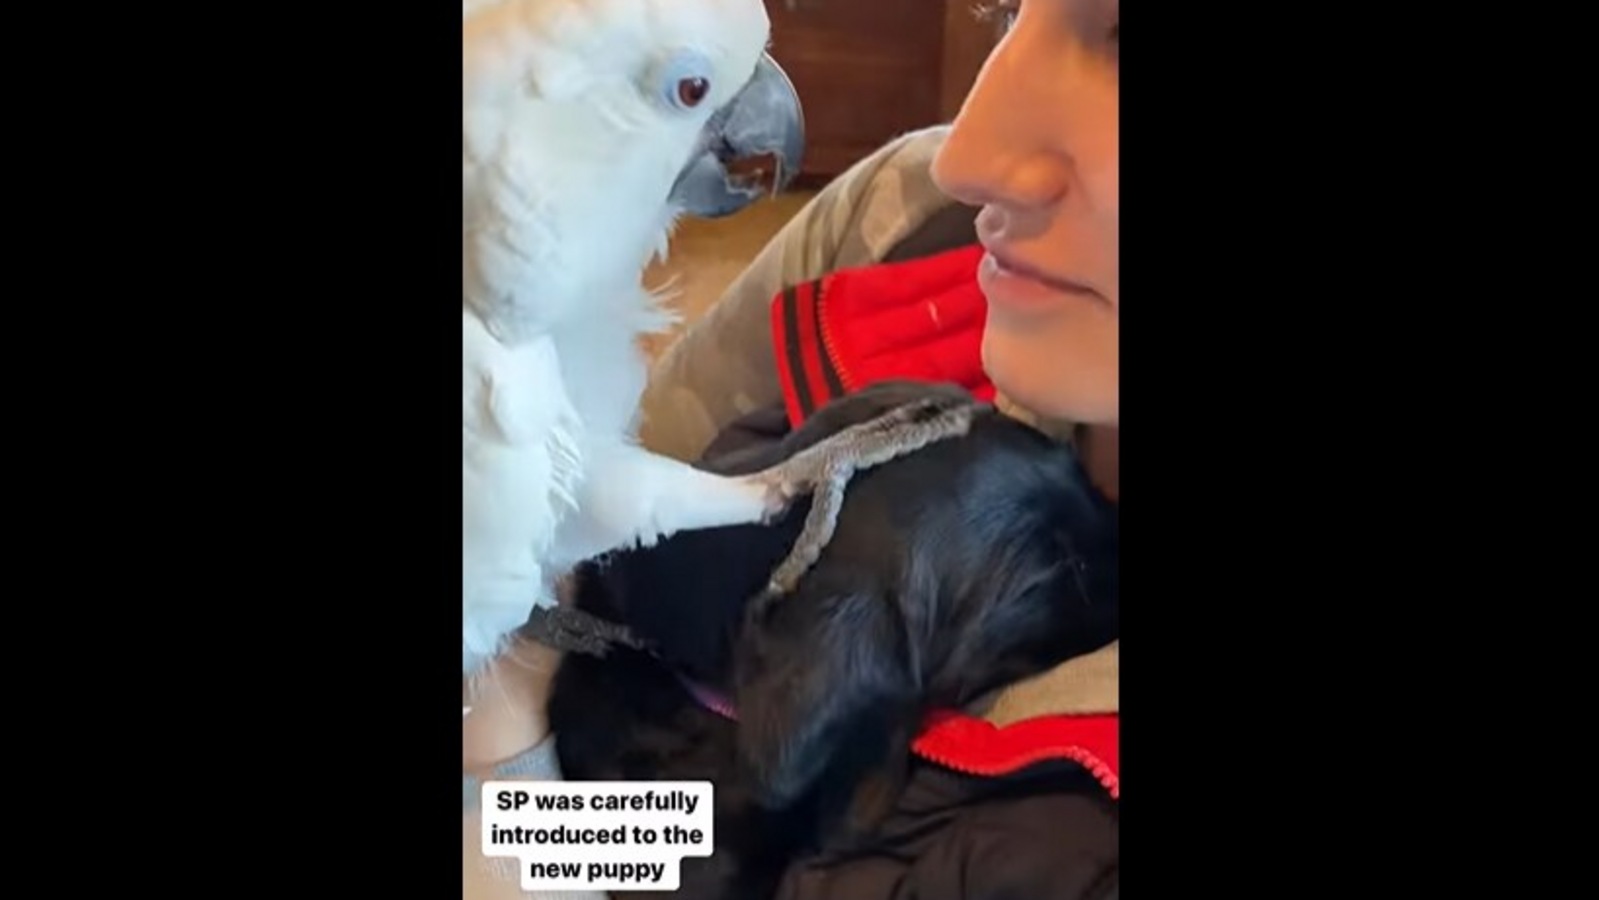 Bird adorably saying 'I love you' to its dog friend will make you go aww. Watch